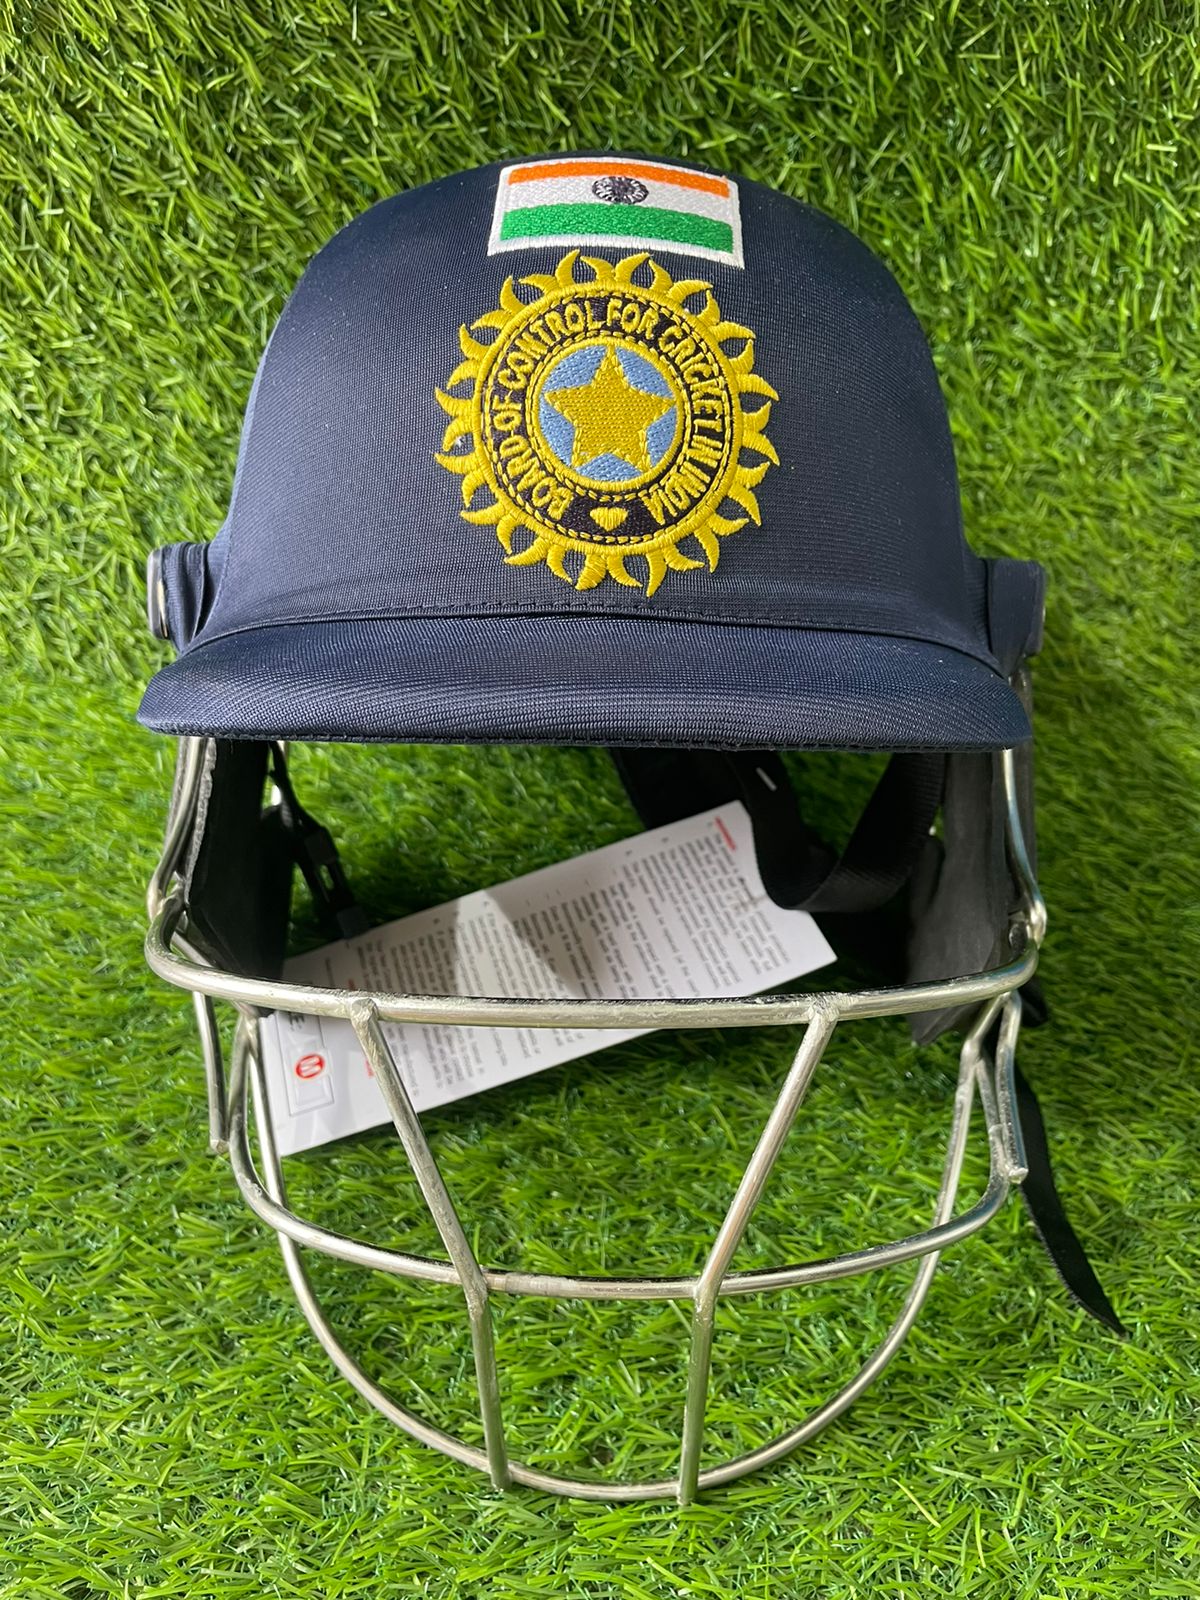 The Board of Control for Cricket in India